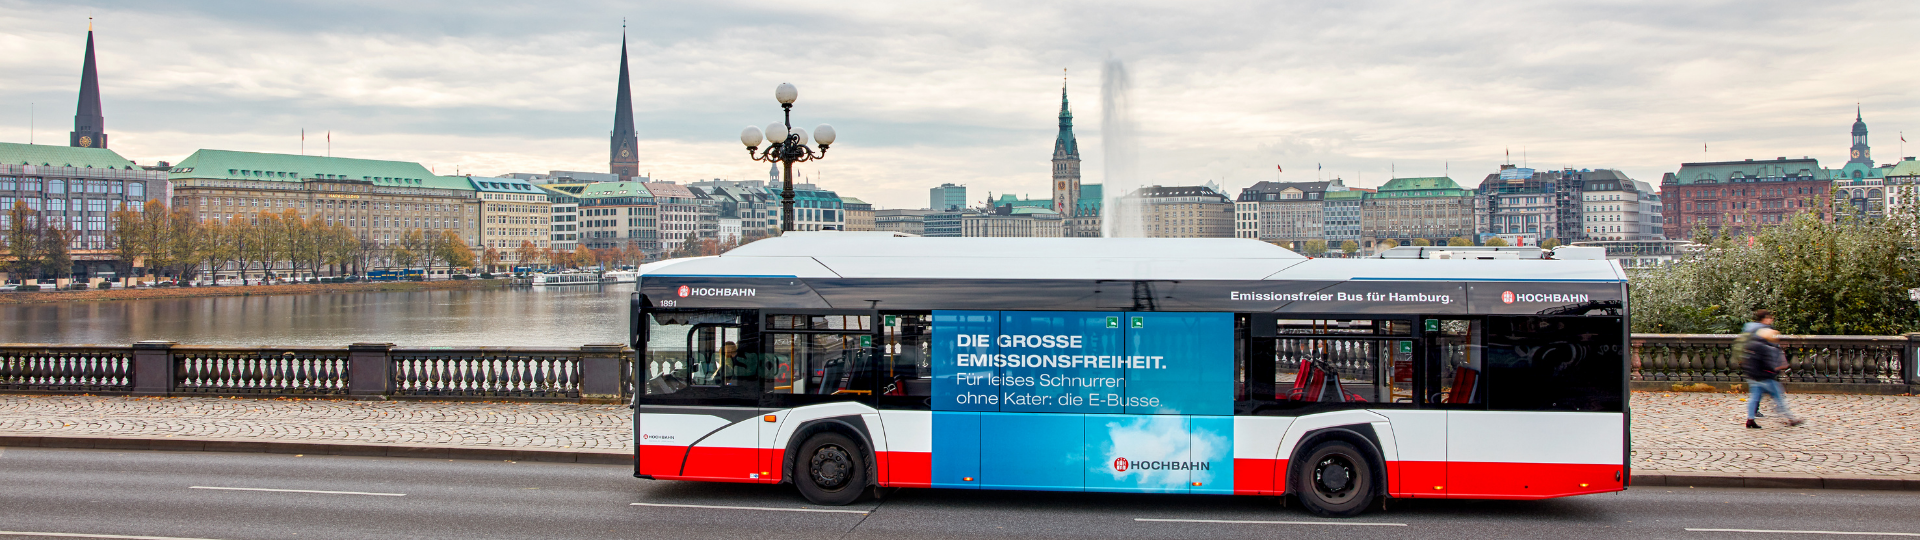 Solaris receives first order under a tender for 530 e-buses for Hamburg